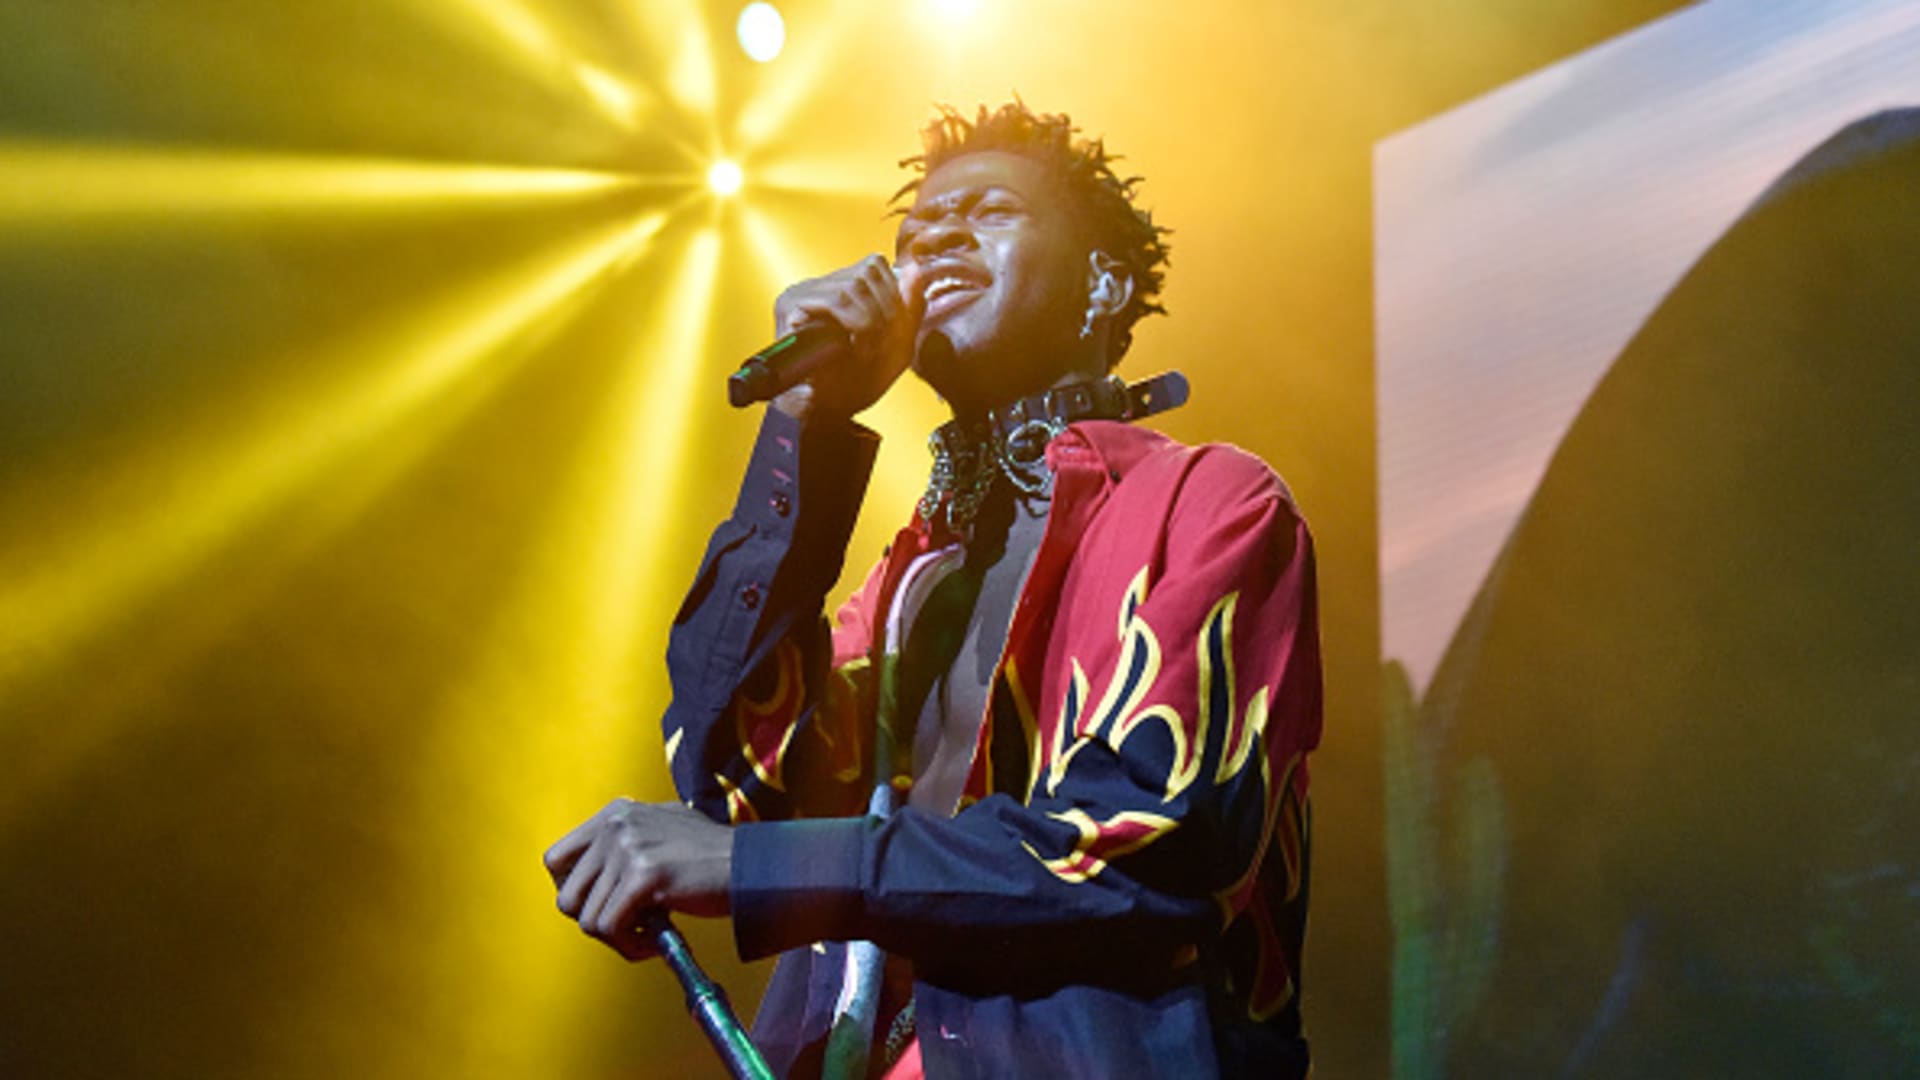 Lil Nas X performs onstage during WiLD 94.9's FM's Jingle Ball 2019 at The Masonic Auditorium on December 08, 2019 in San Francisco, California.